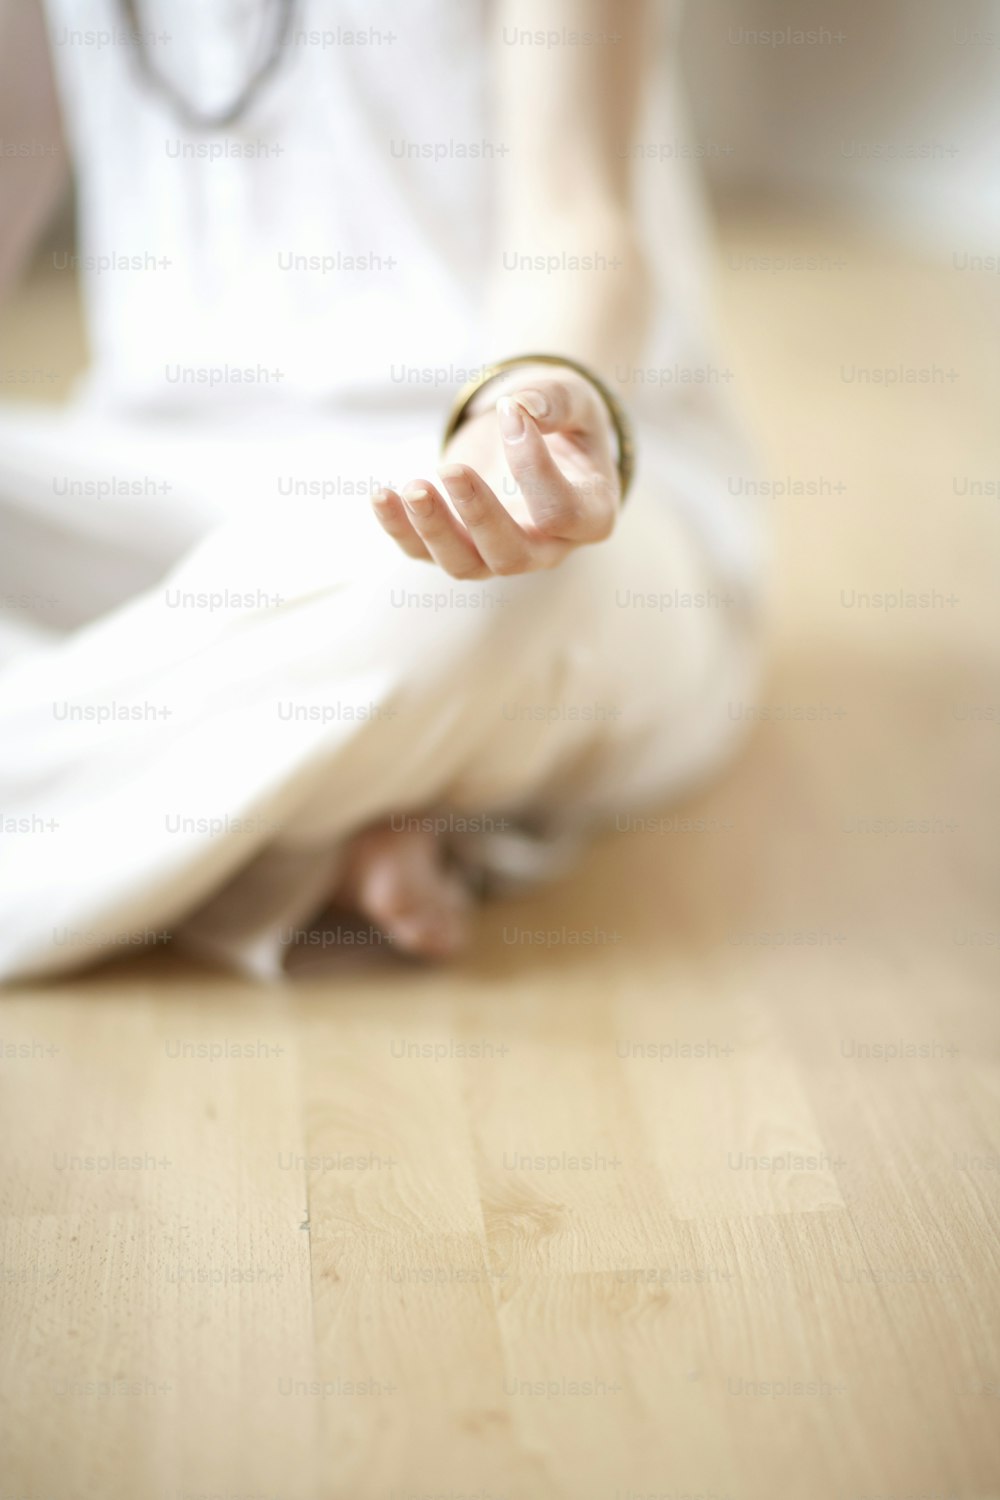 a person sitting on the floor with a ring in their hand